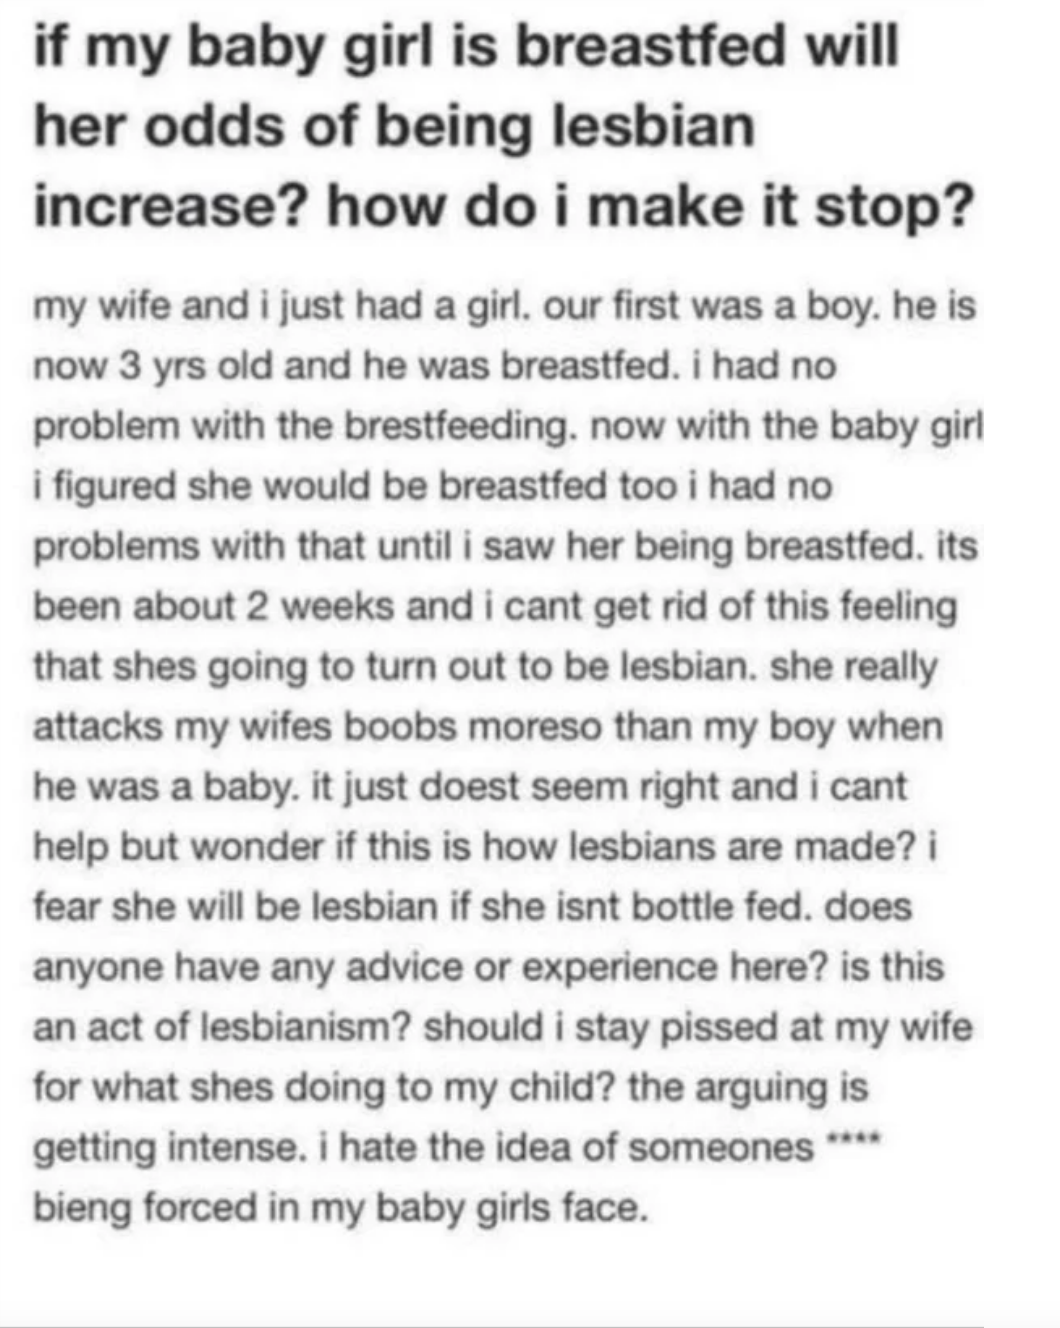 Man doesn&#x27;t like seeing his baby girl being breastfed because she &quot;attacks&quot; his wife&#x27;s boobs more than his son did, and he wonders if this is how lesbians are made and if he should &quot;stay pissed&quot; at his wife for what she&#x27;s doing to his child